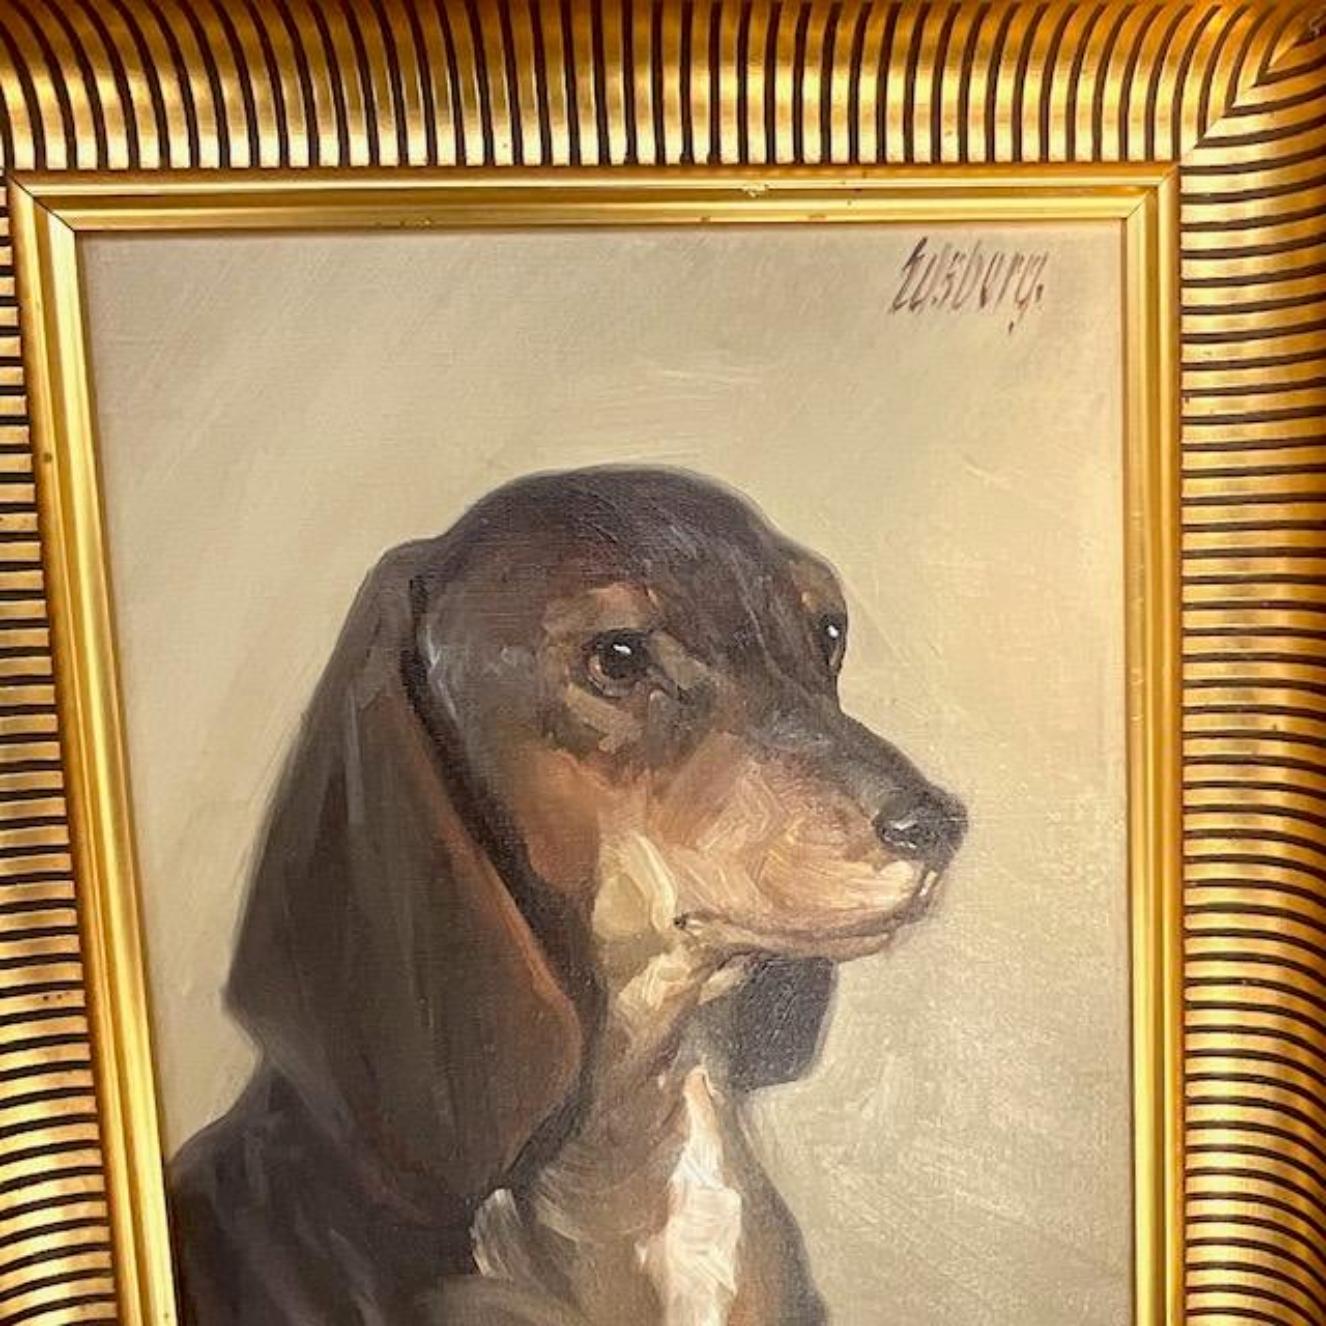 A fabulous vintage Boho original oil painting. A chic composition of a small Dachshund. Signed by the artist. Acquired from a Palm Beach estate.